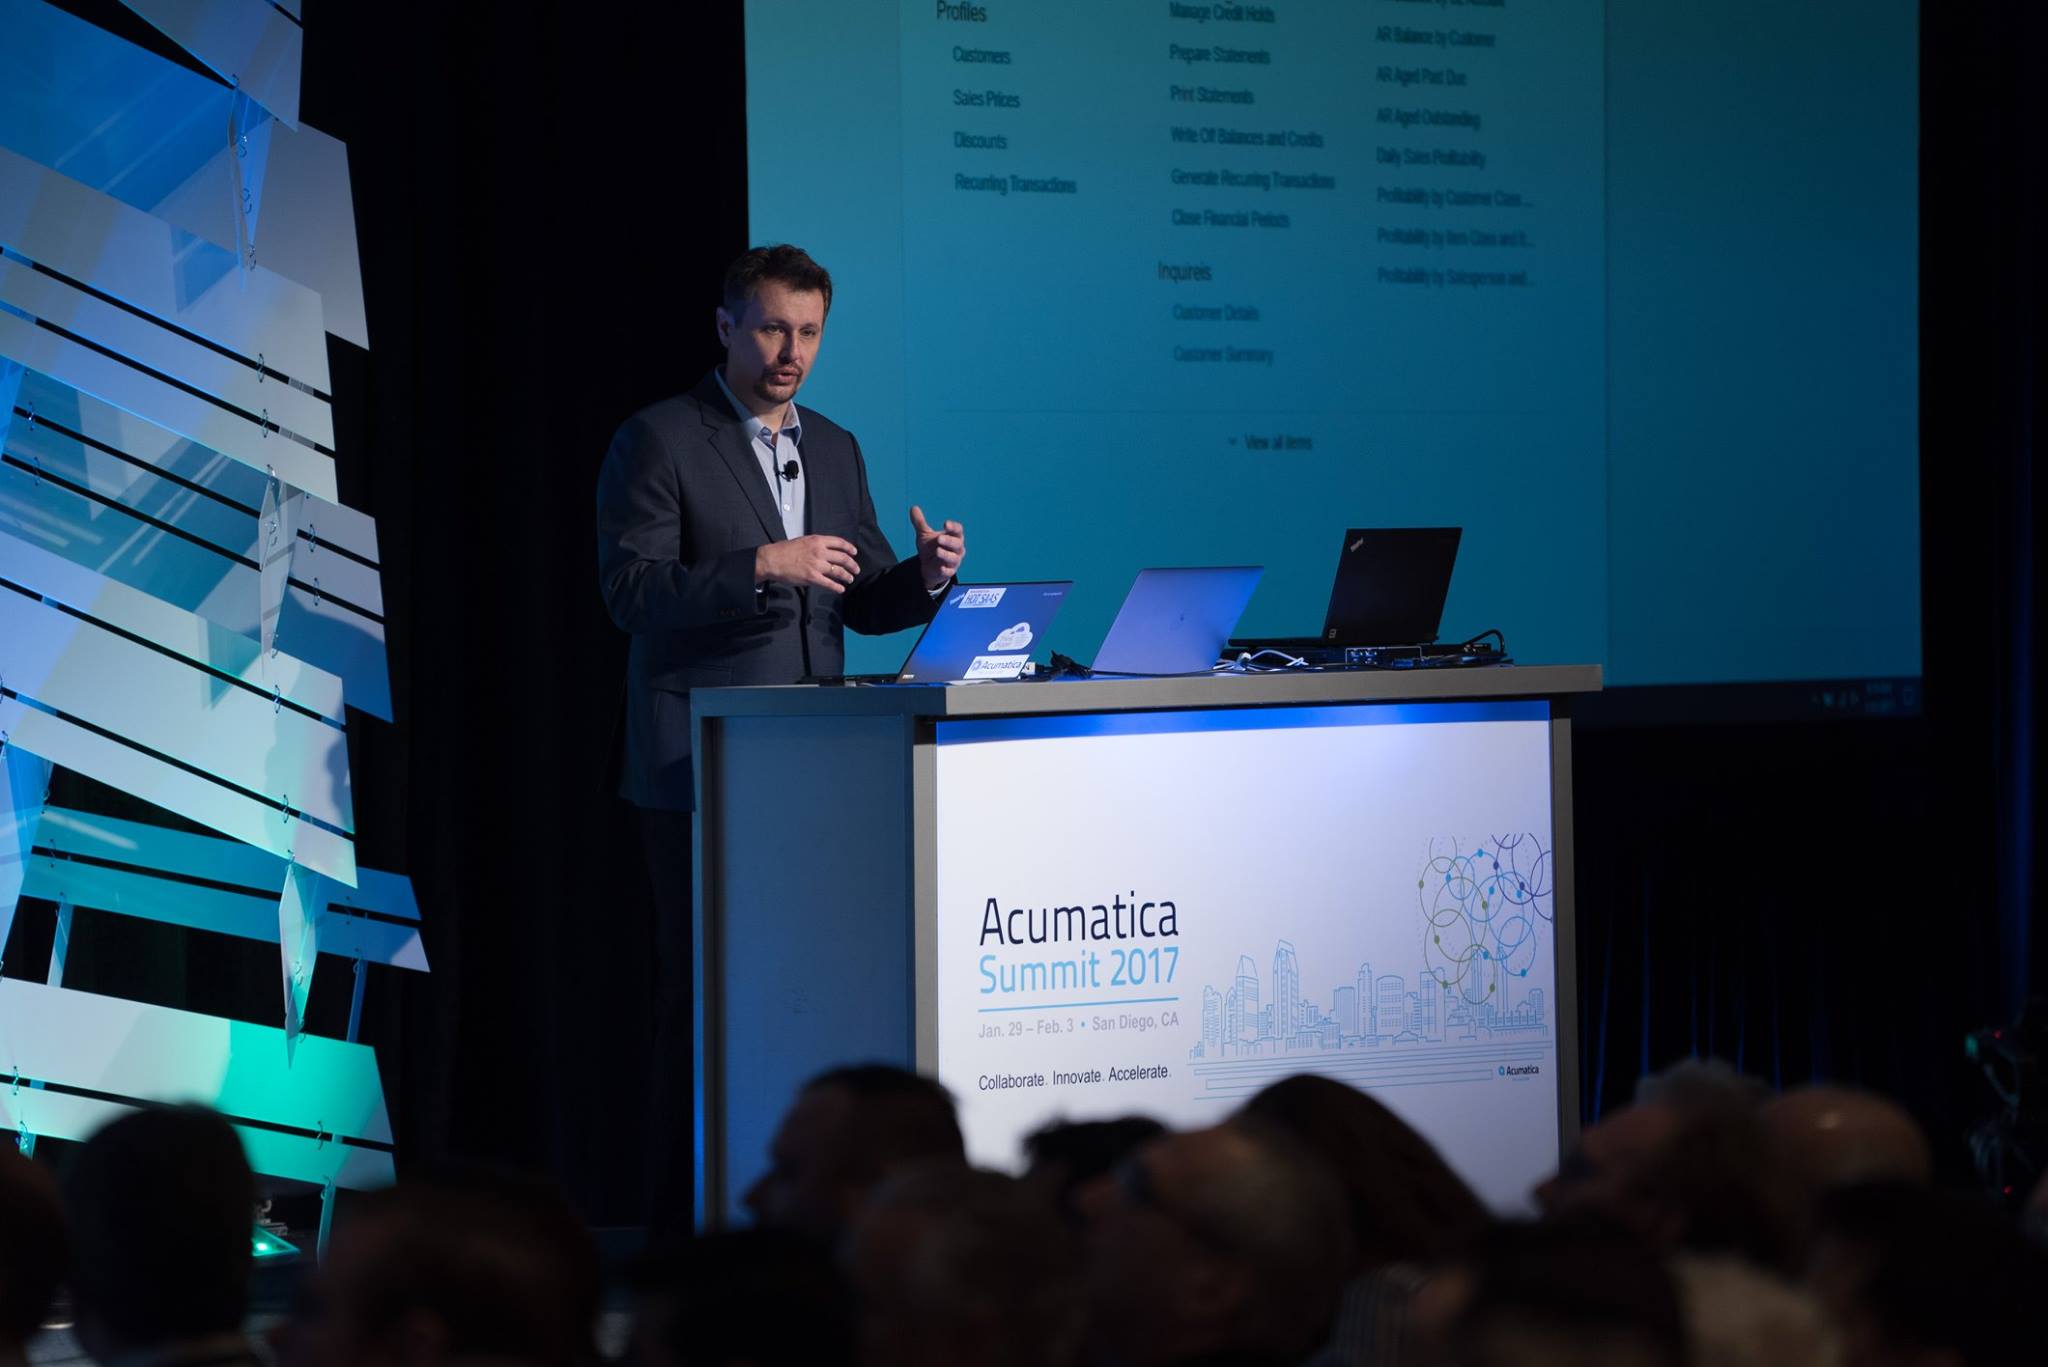 Acumatica CTO Mike Chtchelkonogov demonstrates the new Acumatica features and integrations